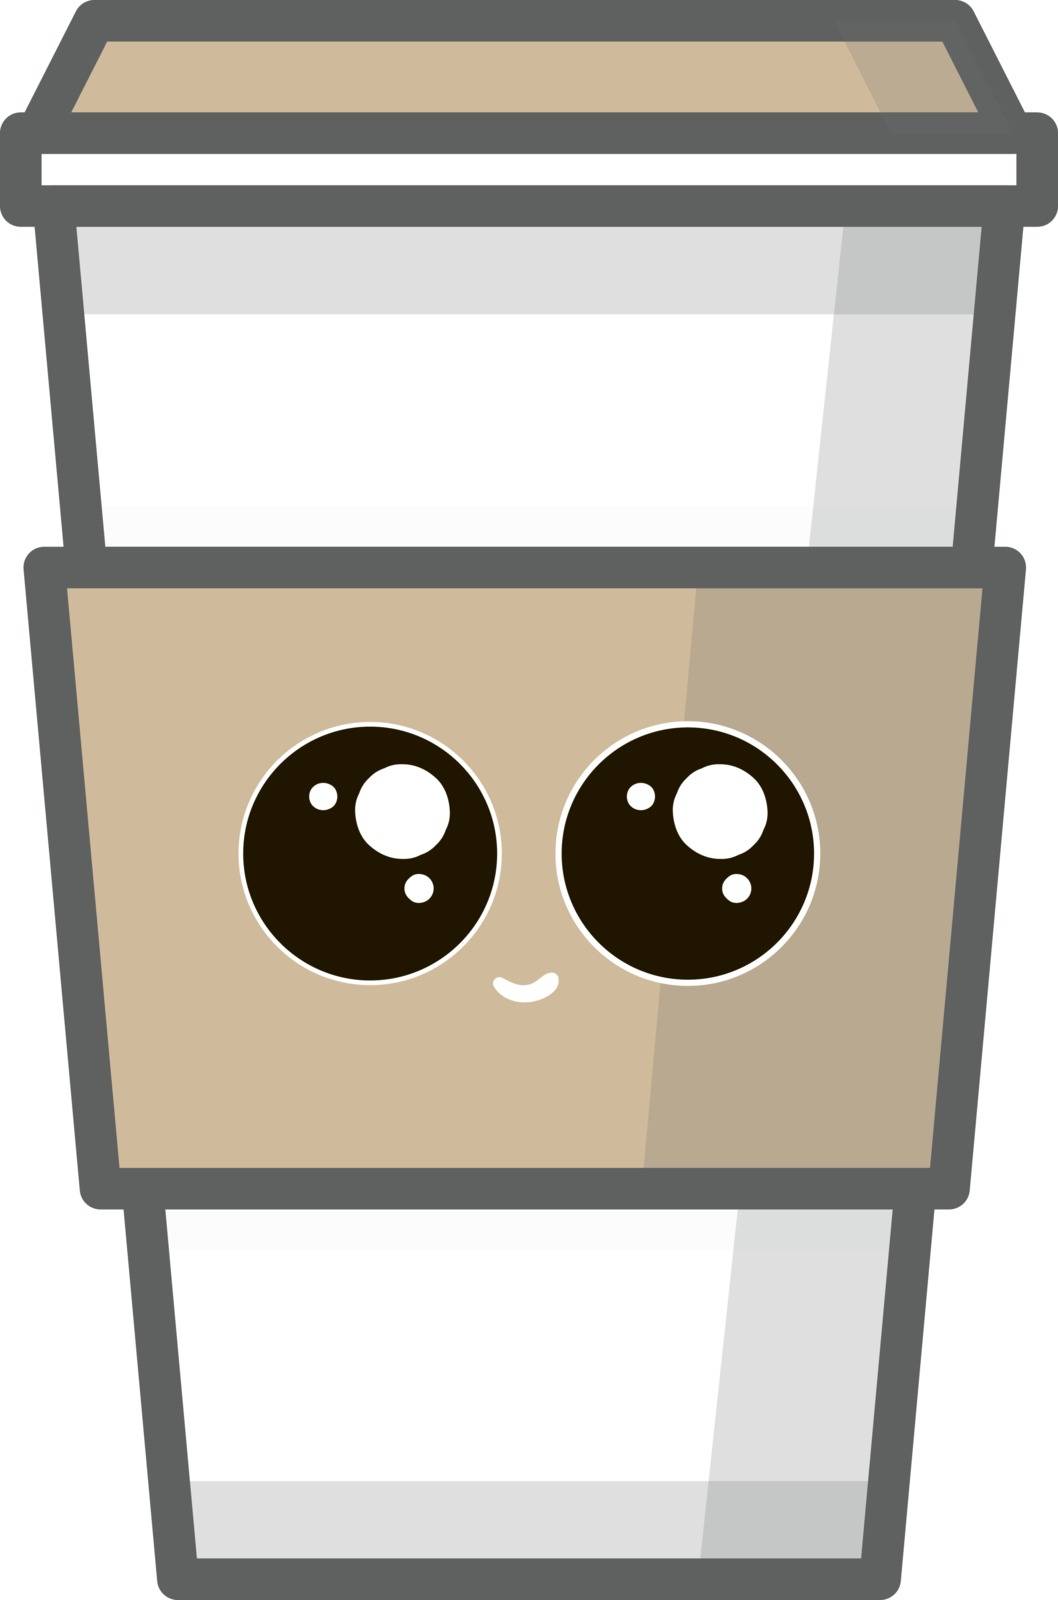 Coffee to go with cute eyes, illustration, vector on white backg by Morphart